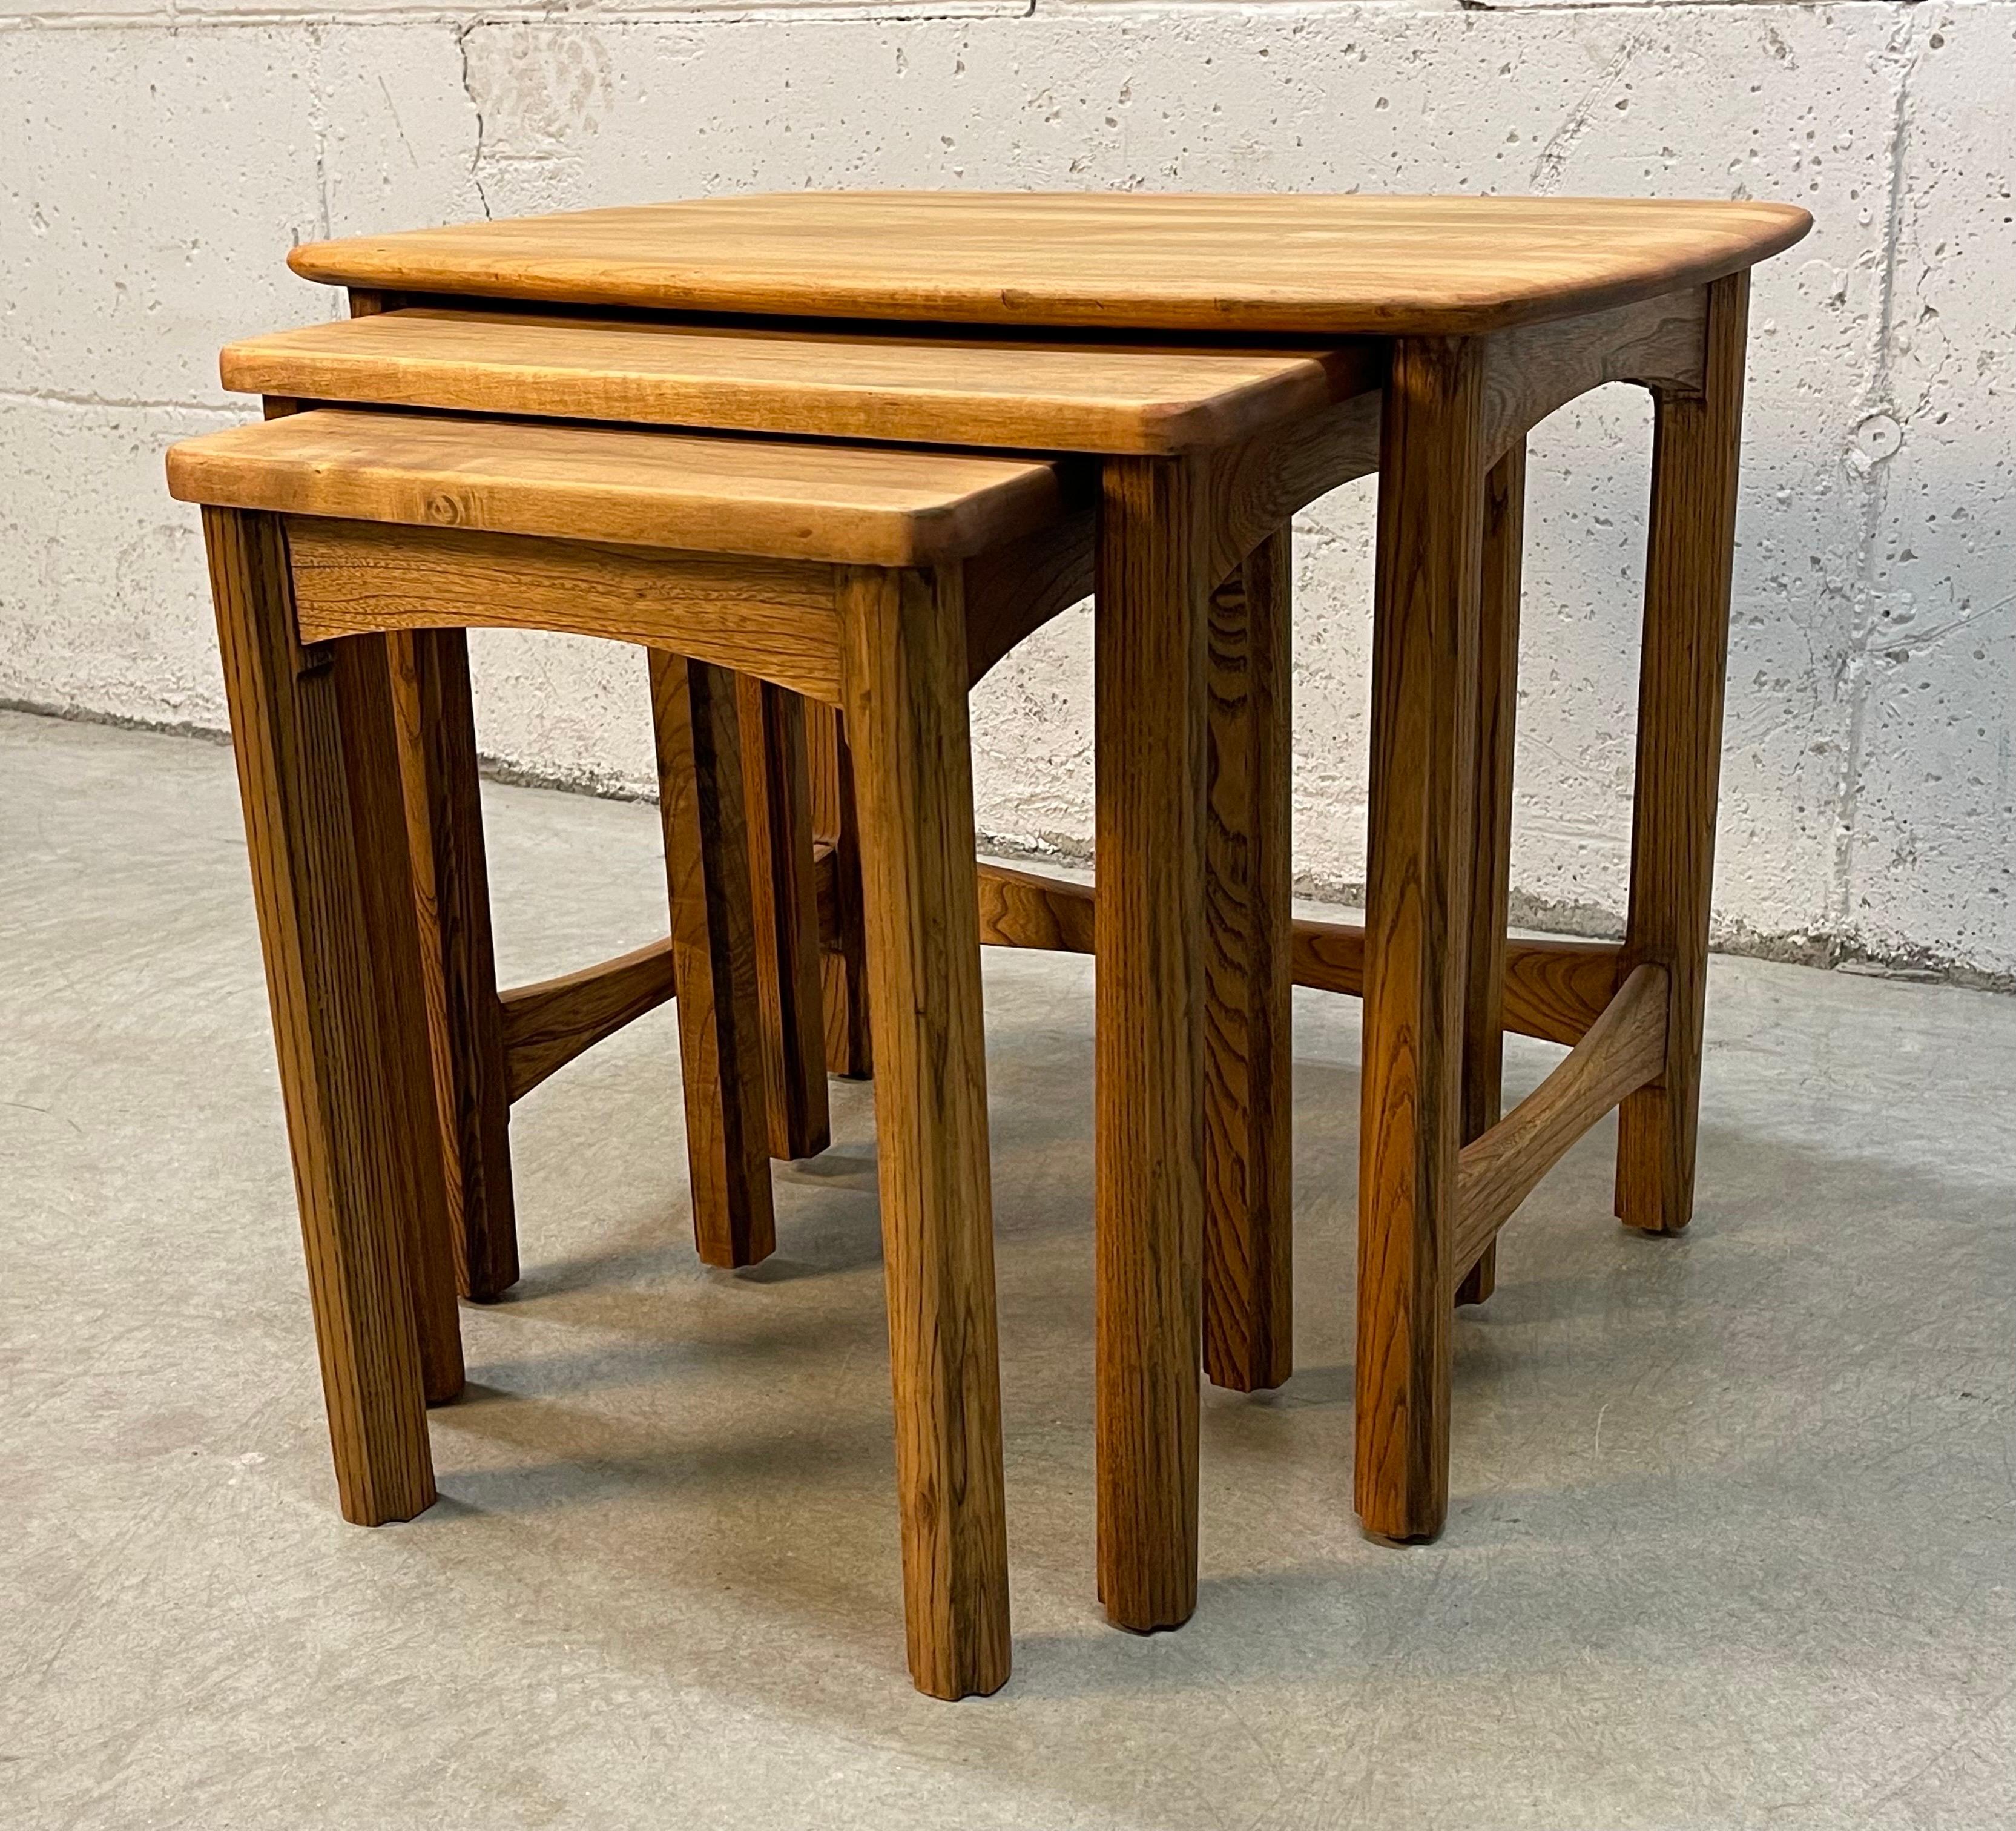 Vintage 1960s maple and oak wood nesting tables. The table tops have a rounded edge and all sit neatly within each other. The large table is 24” x 18” x 20”. Middle table is 18” x 14” x 19”. Small table is 13.5” x 12.5” x 18”. All tables are in